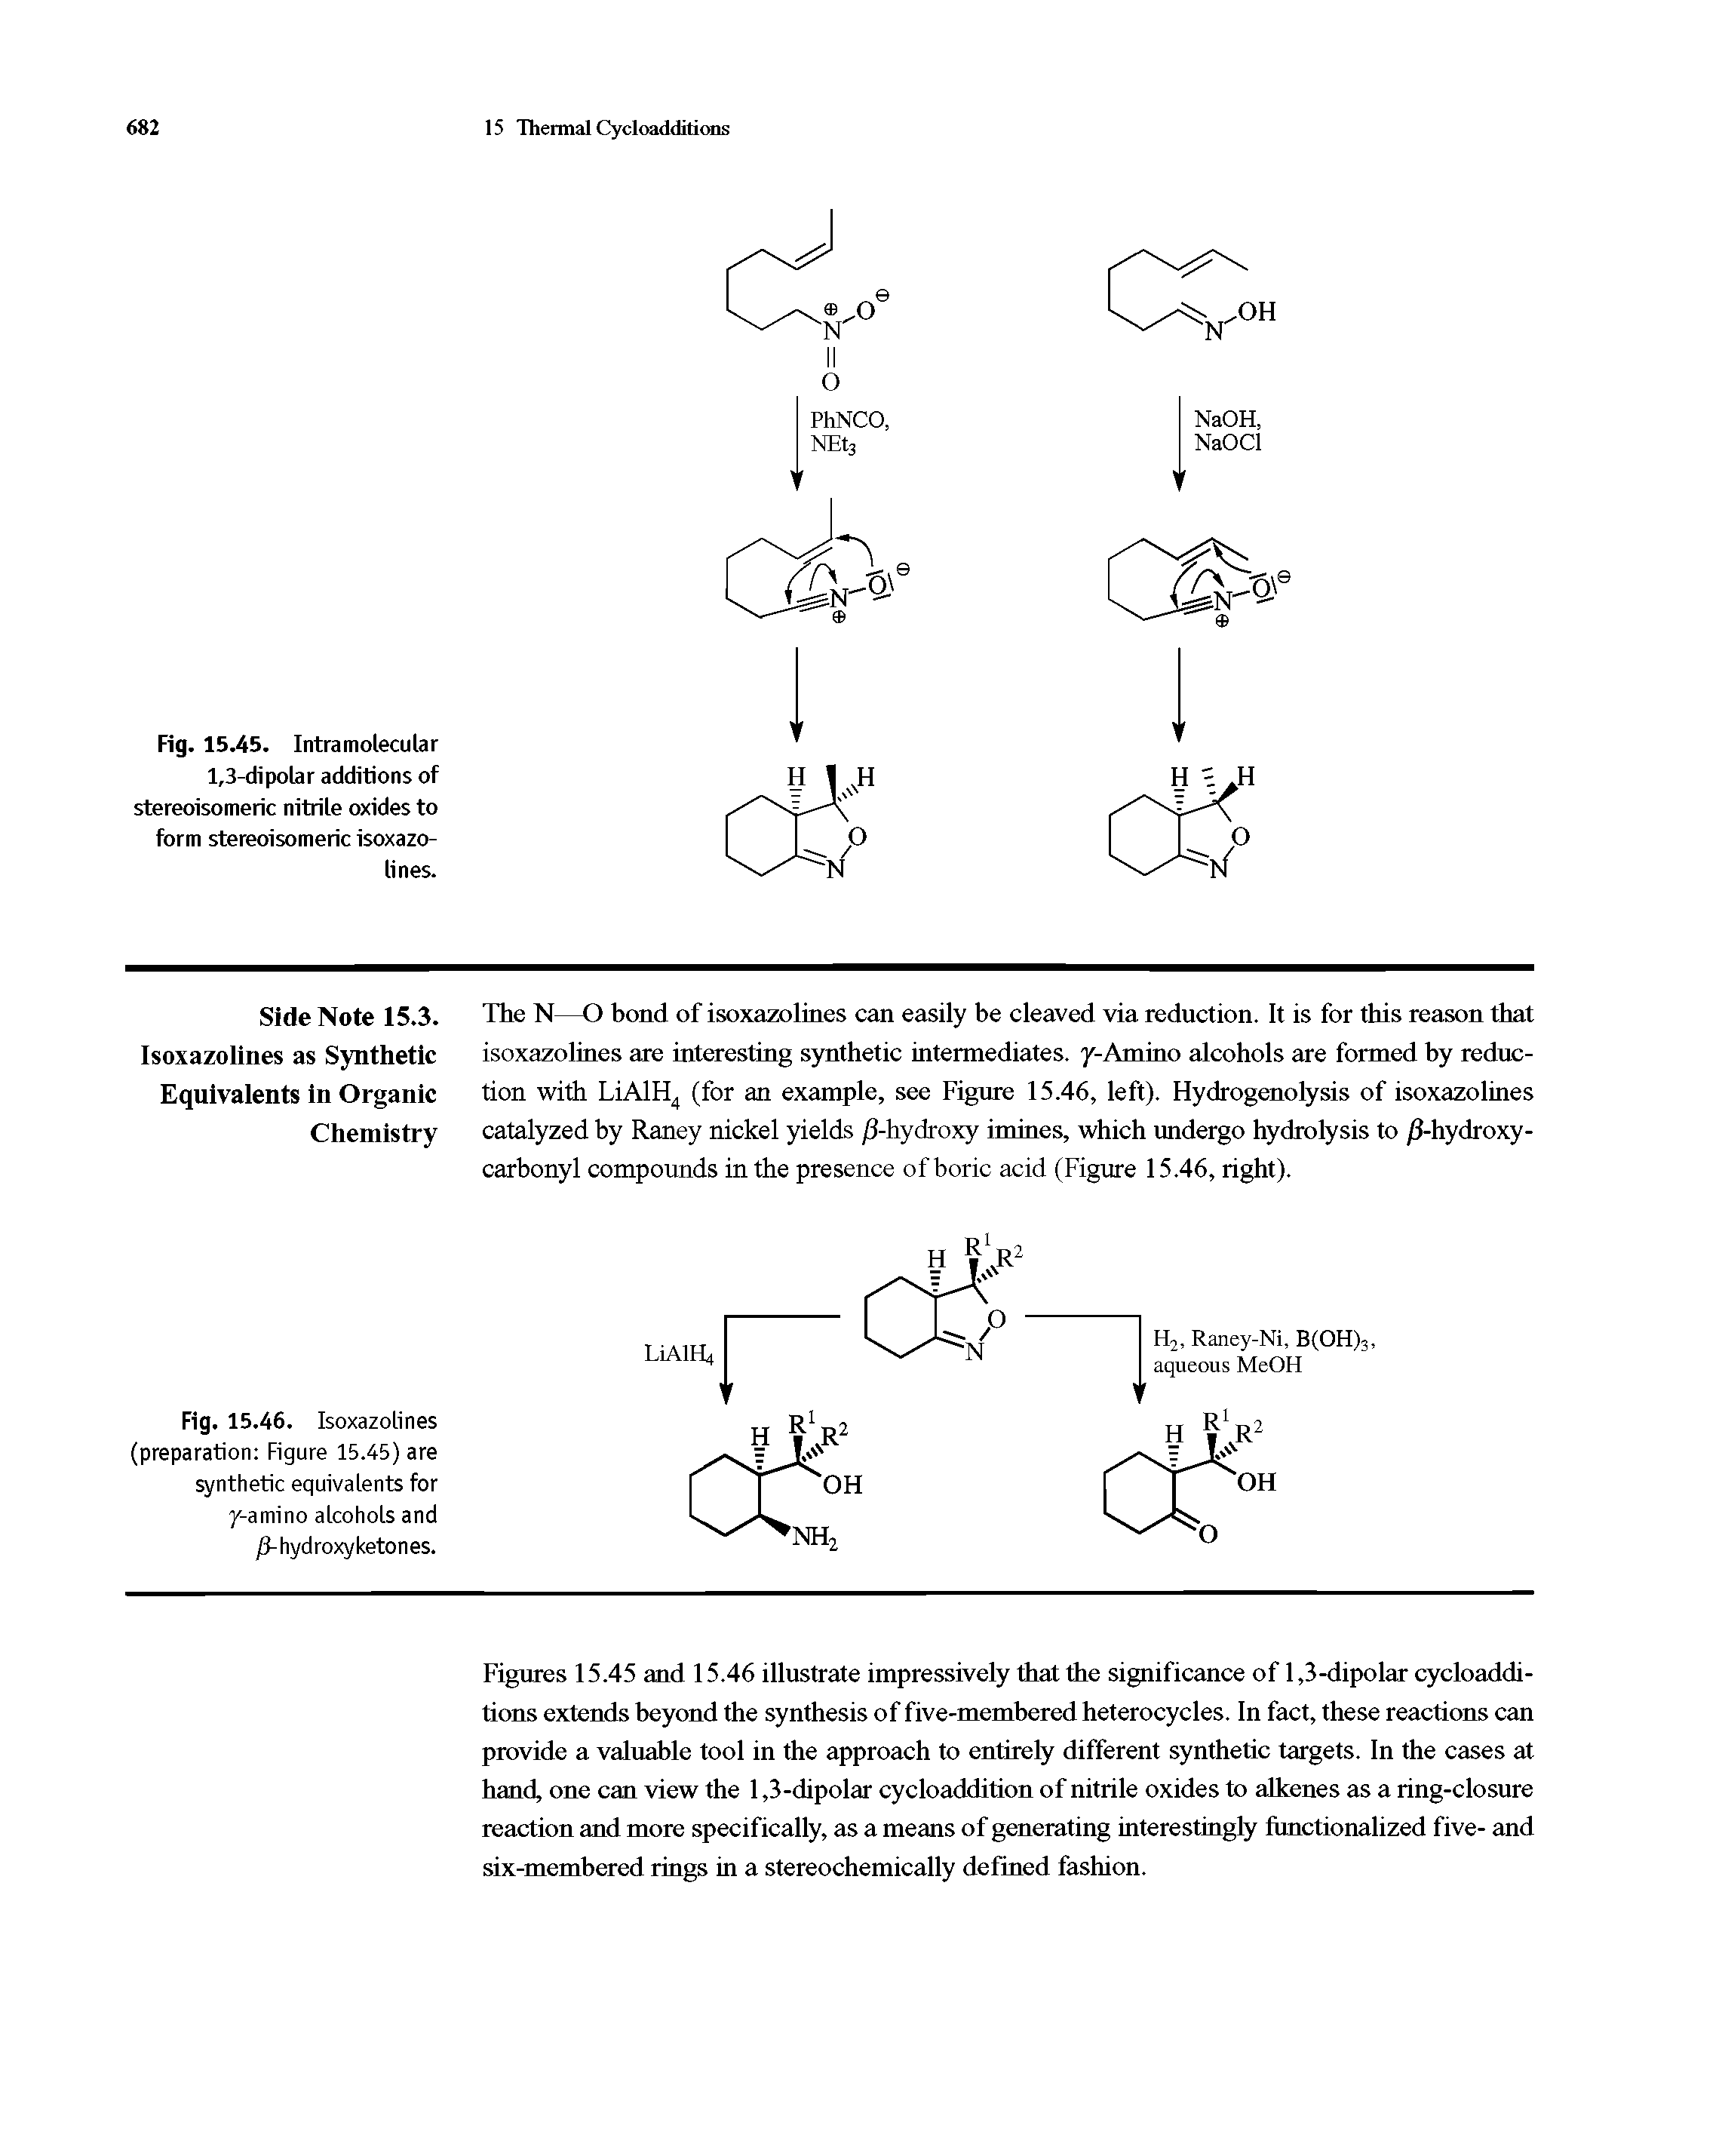 Figures 15.45 and 15.46 illustrate impressively that the significance of 1,3-dipolar cycloadditions extends beyond the synthesis of five-membered heterocycles. In fact, these reactions can provide a valuable tool in the approach to entirely different synthetic targets. In the cases at hand, one can view the 1,3-dipolar cycloaddition of nitrile oxides to alkenes as a ring-closure reaction and more specifically, as a means of generating interestingly functionalized five- and six-membered rings in a stereochemically defined fashion.